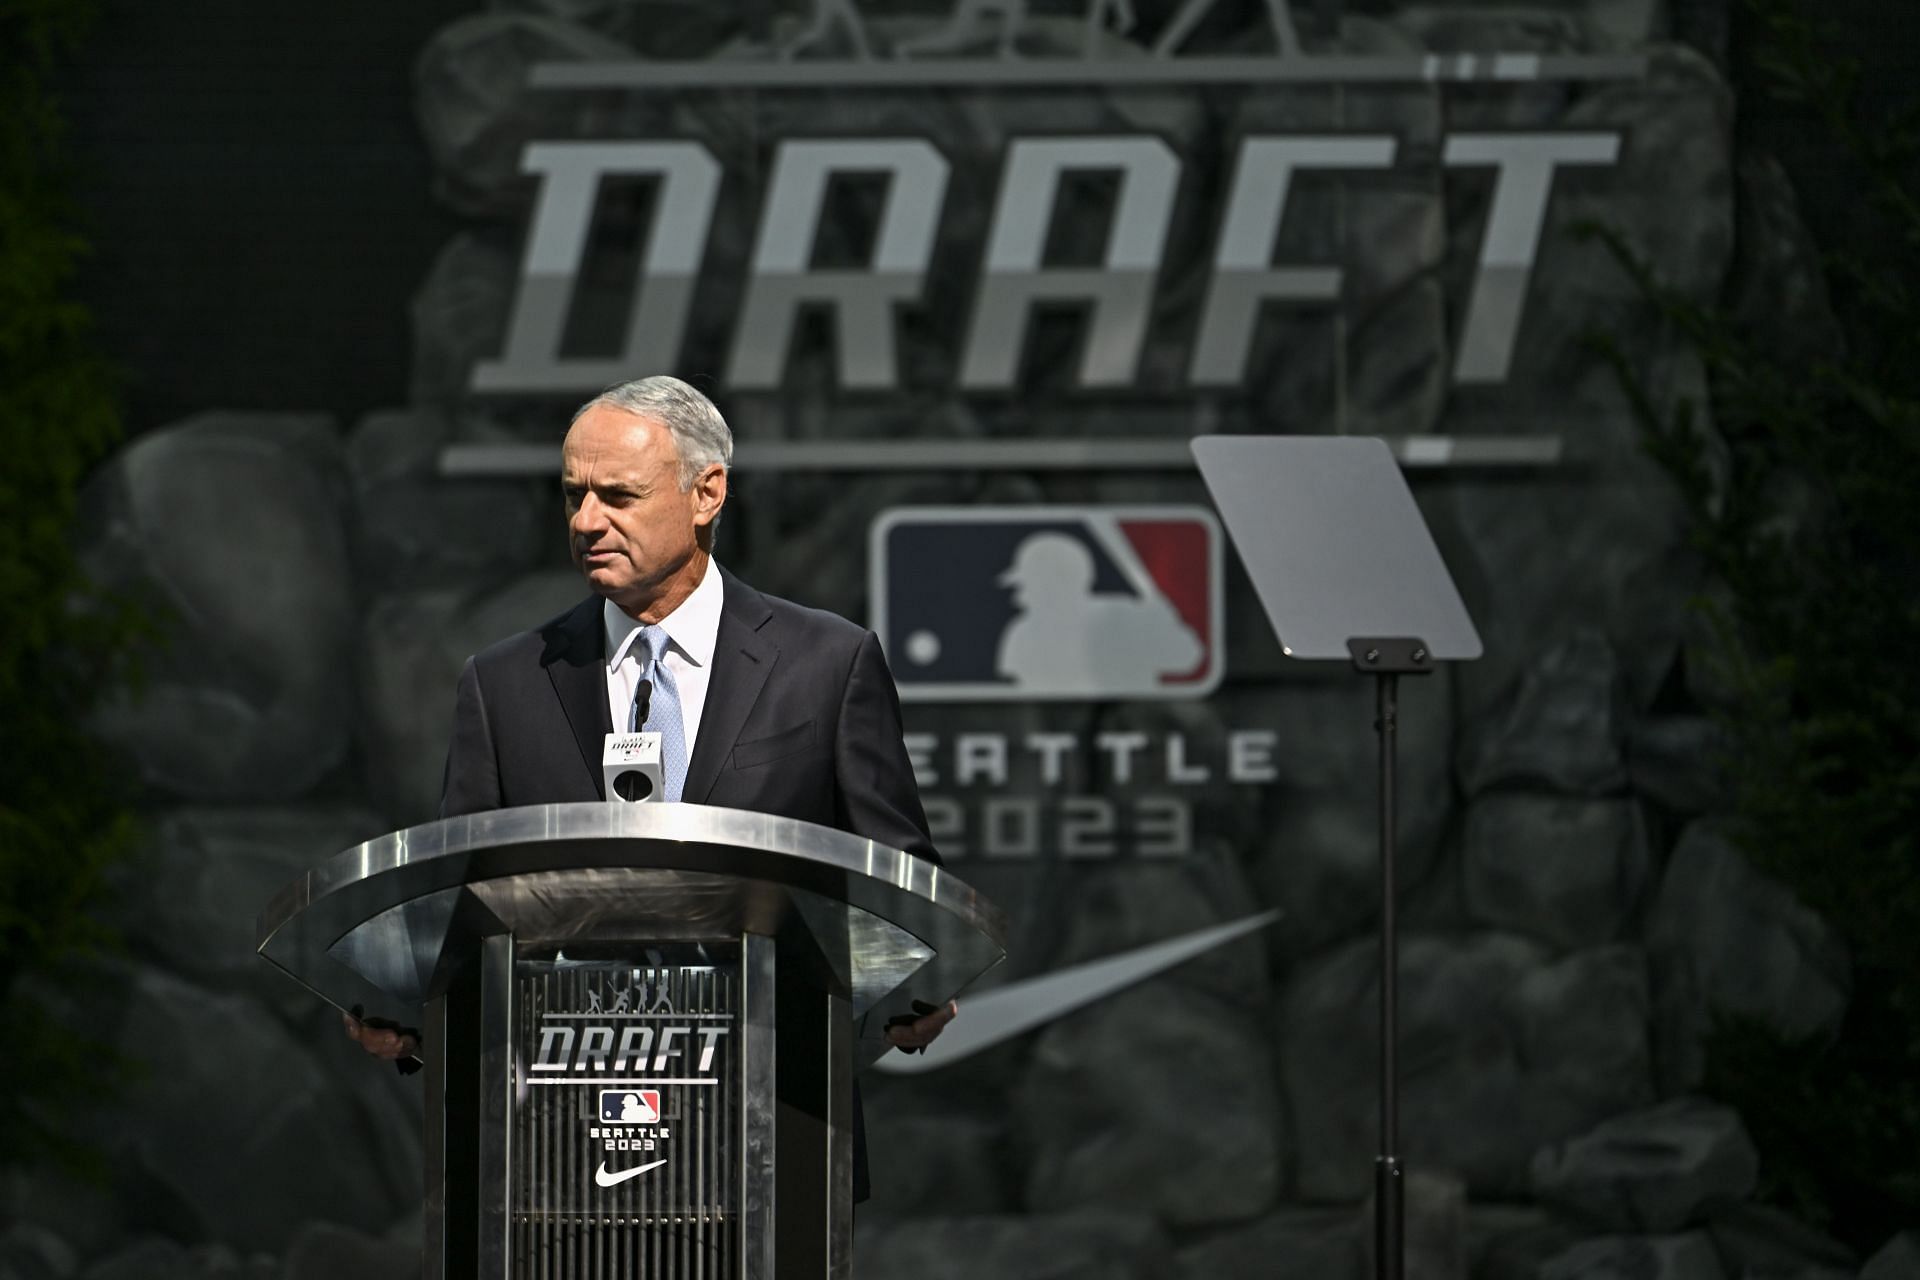 MLB Commissioner, Rob Manfred, stands on stage during the 2023 MLB Draft at Lumen Field on July 09, 2023 in Seattle, Washington.